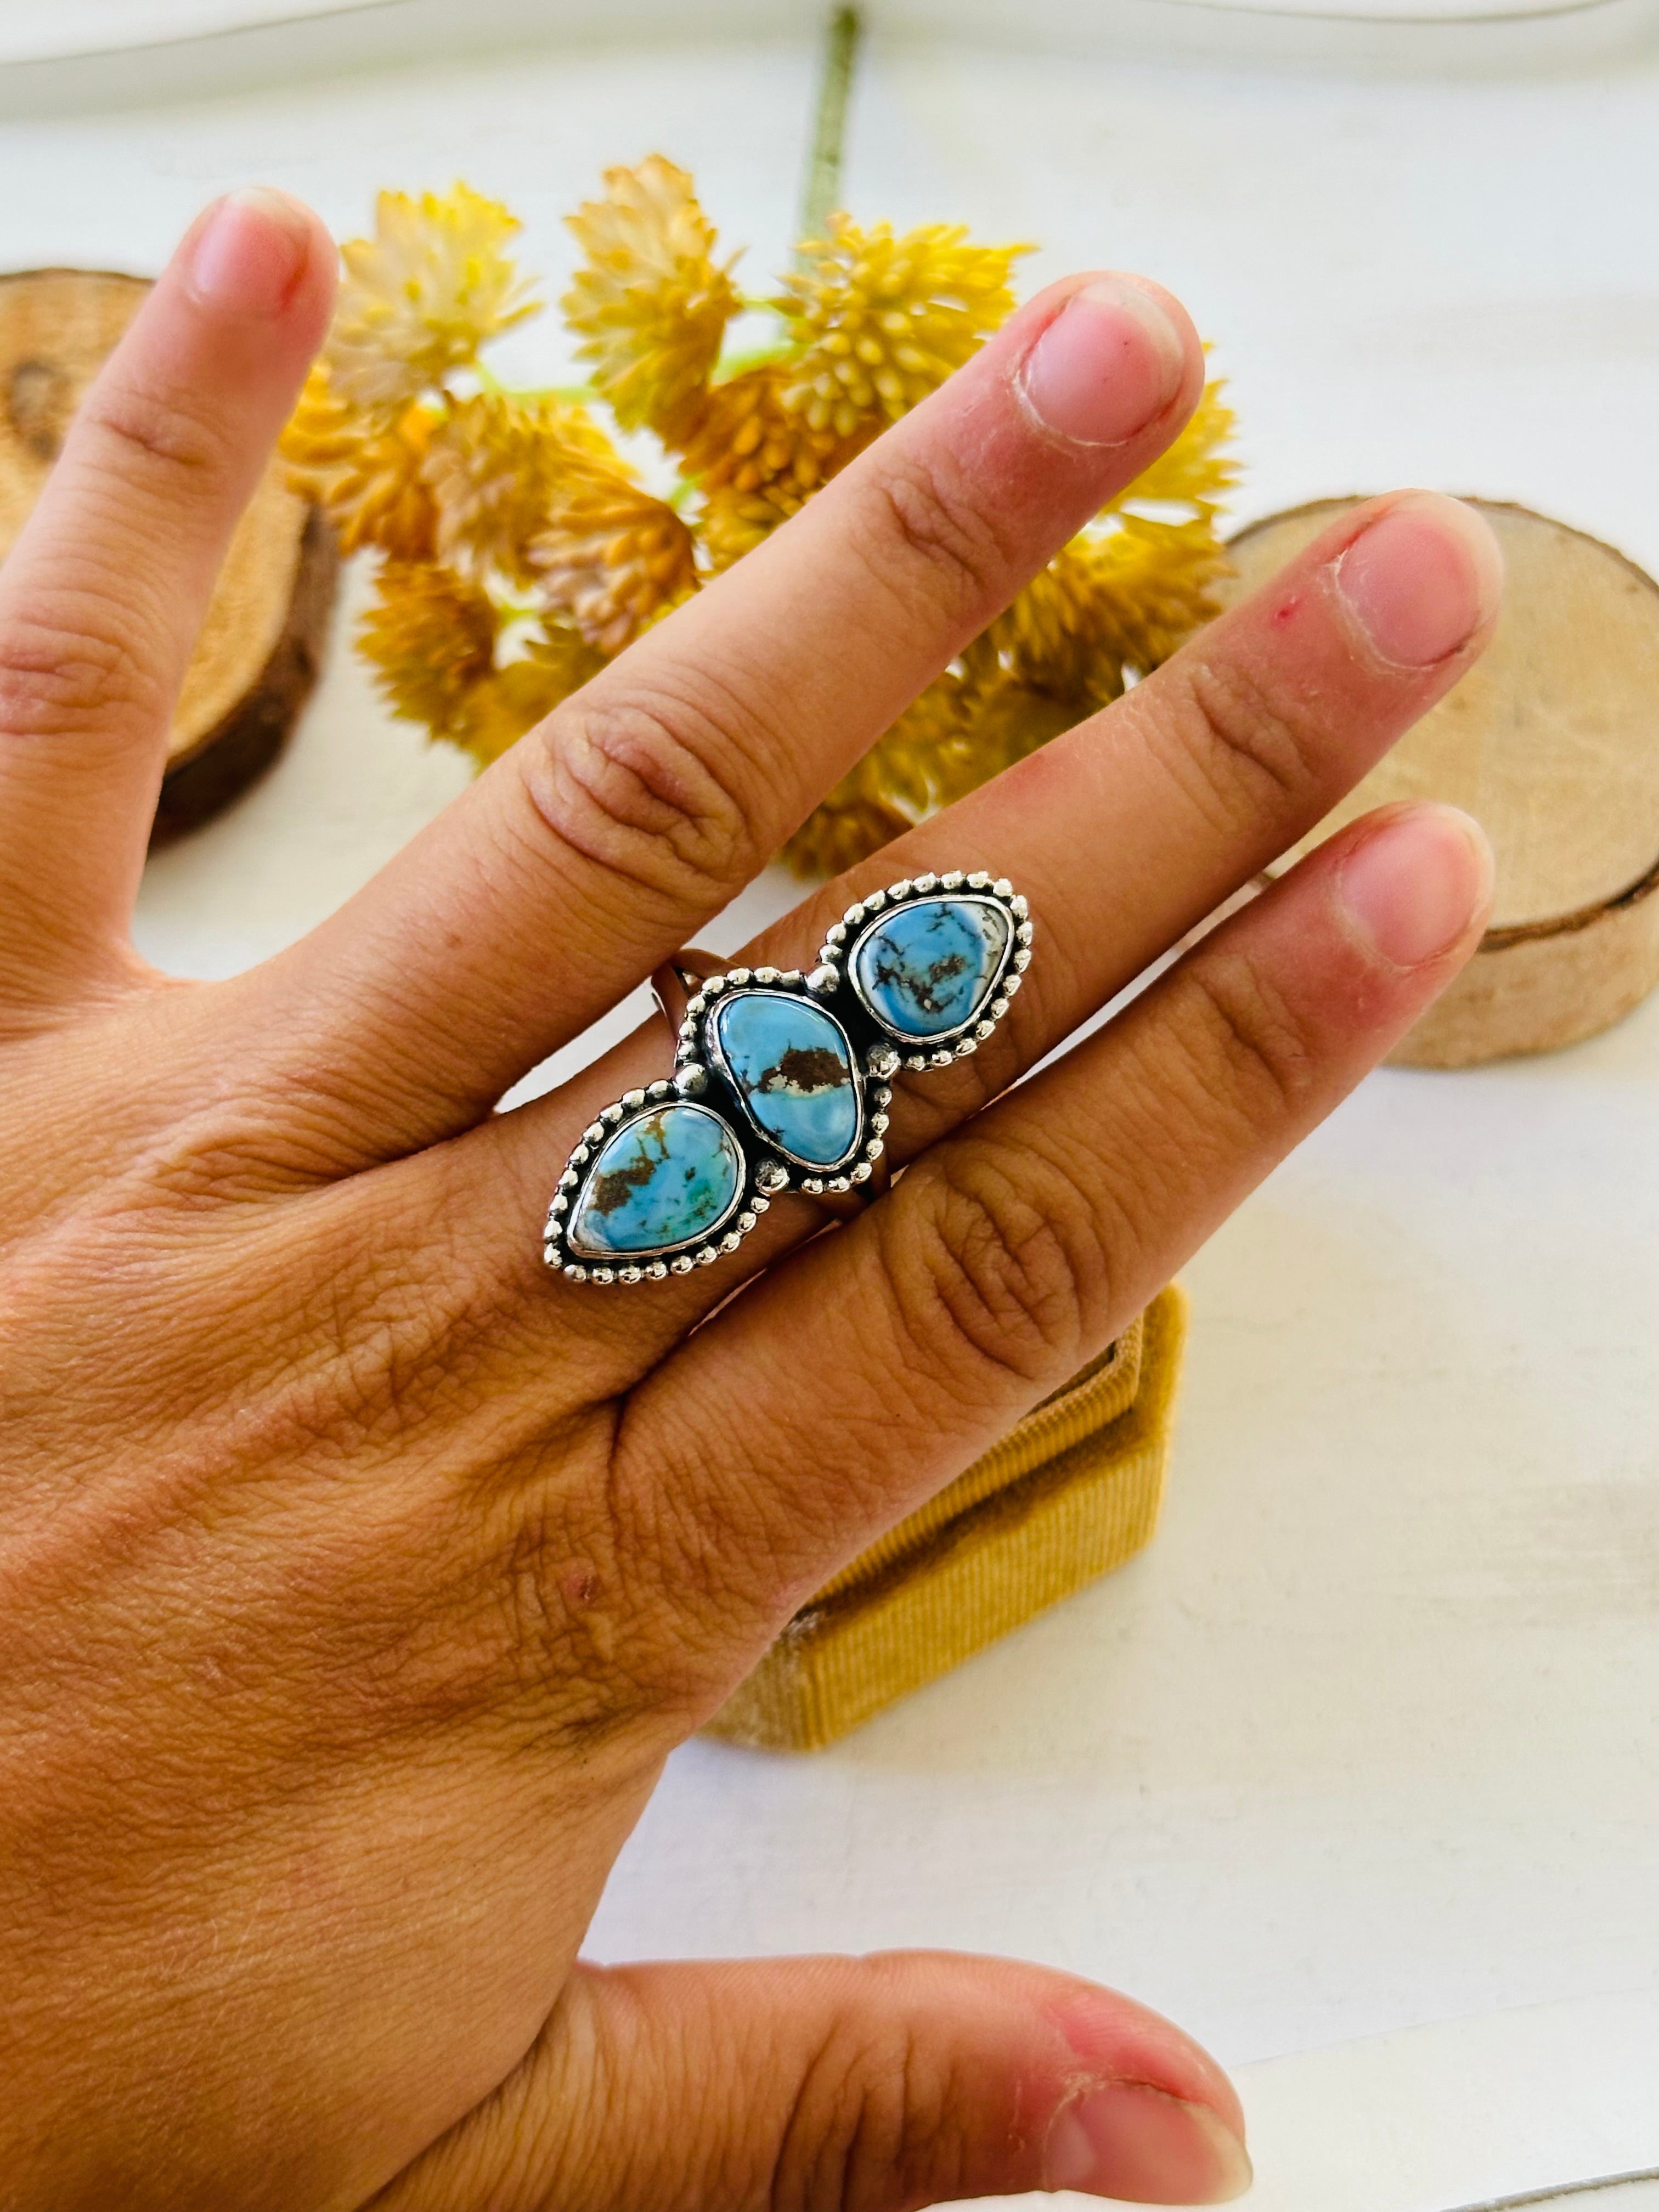 Southwest Handmade Golden Hills Turquoise & Sterling Silver Ring Size 9